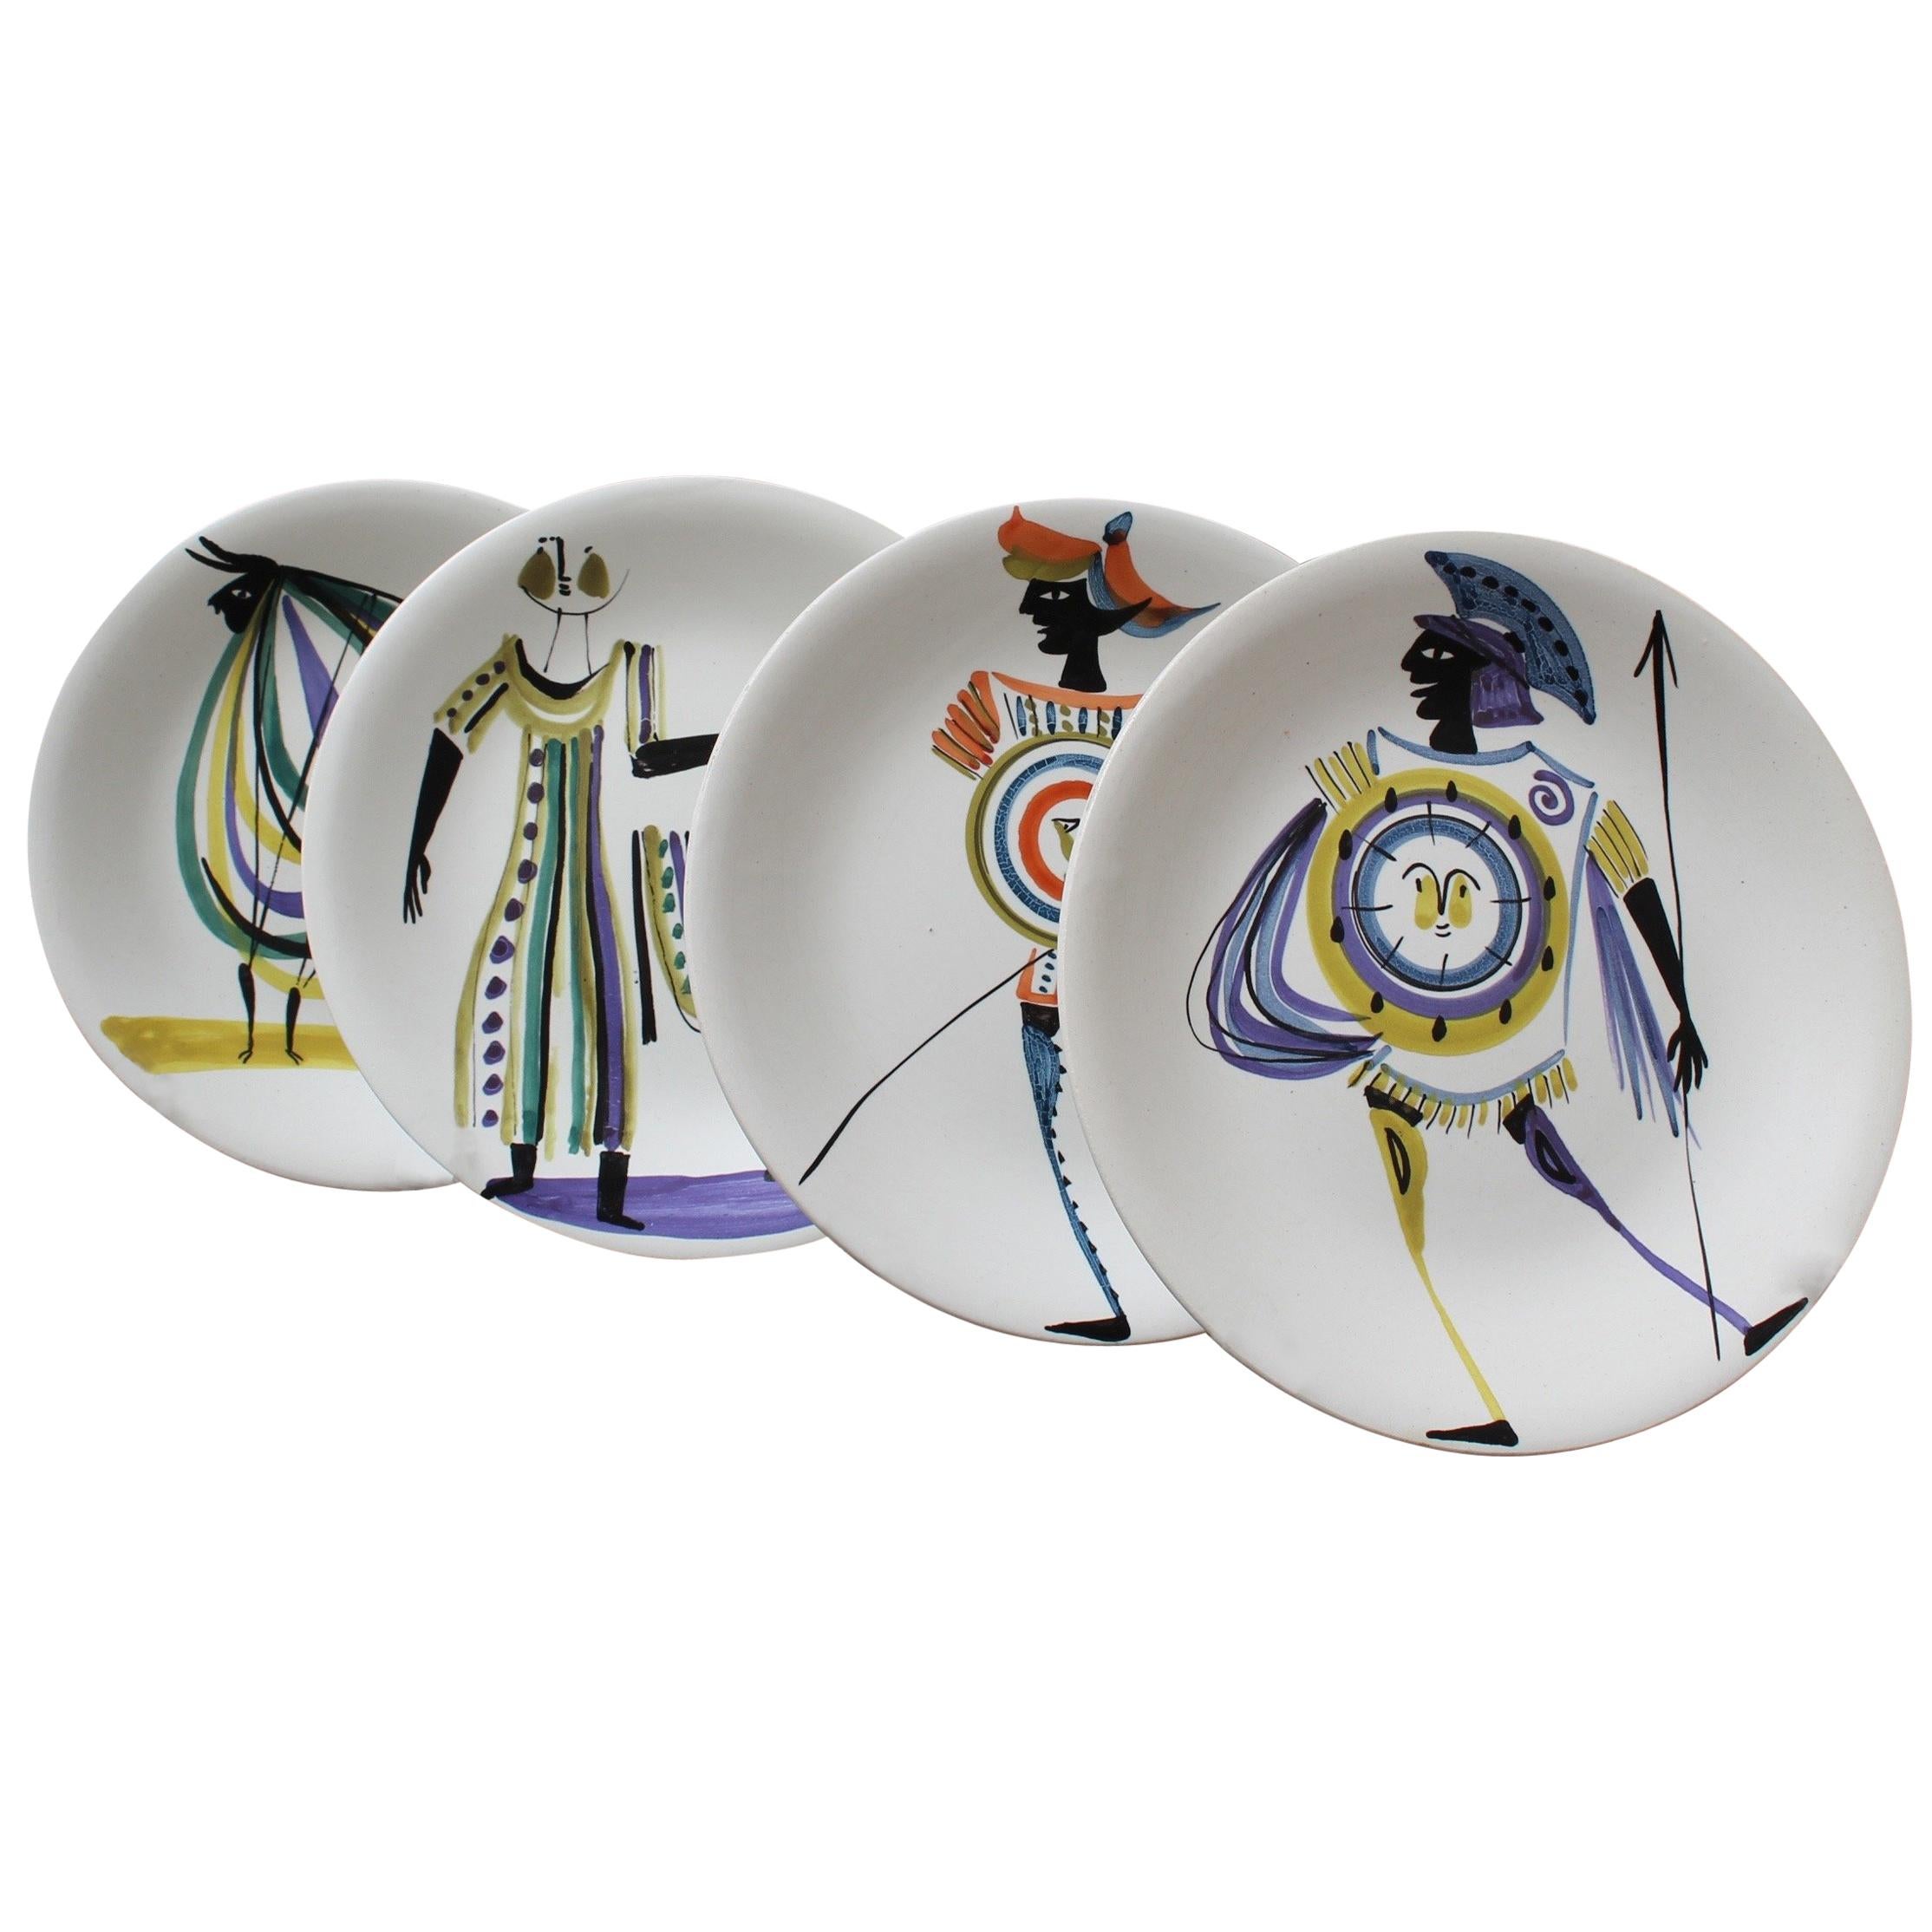 Set of Four Decorative Plates by Roger Capron, circa 1950s